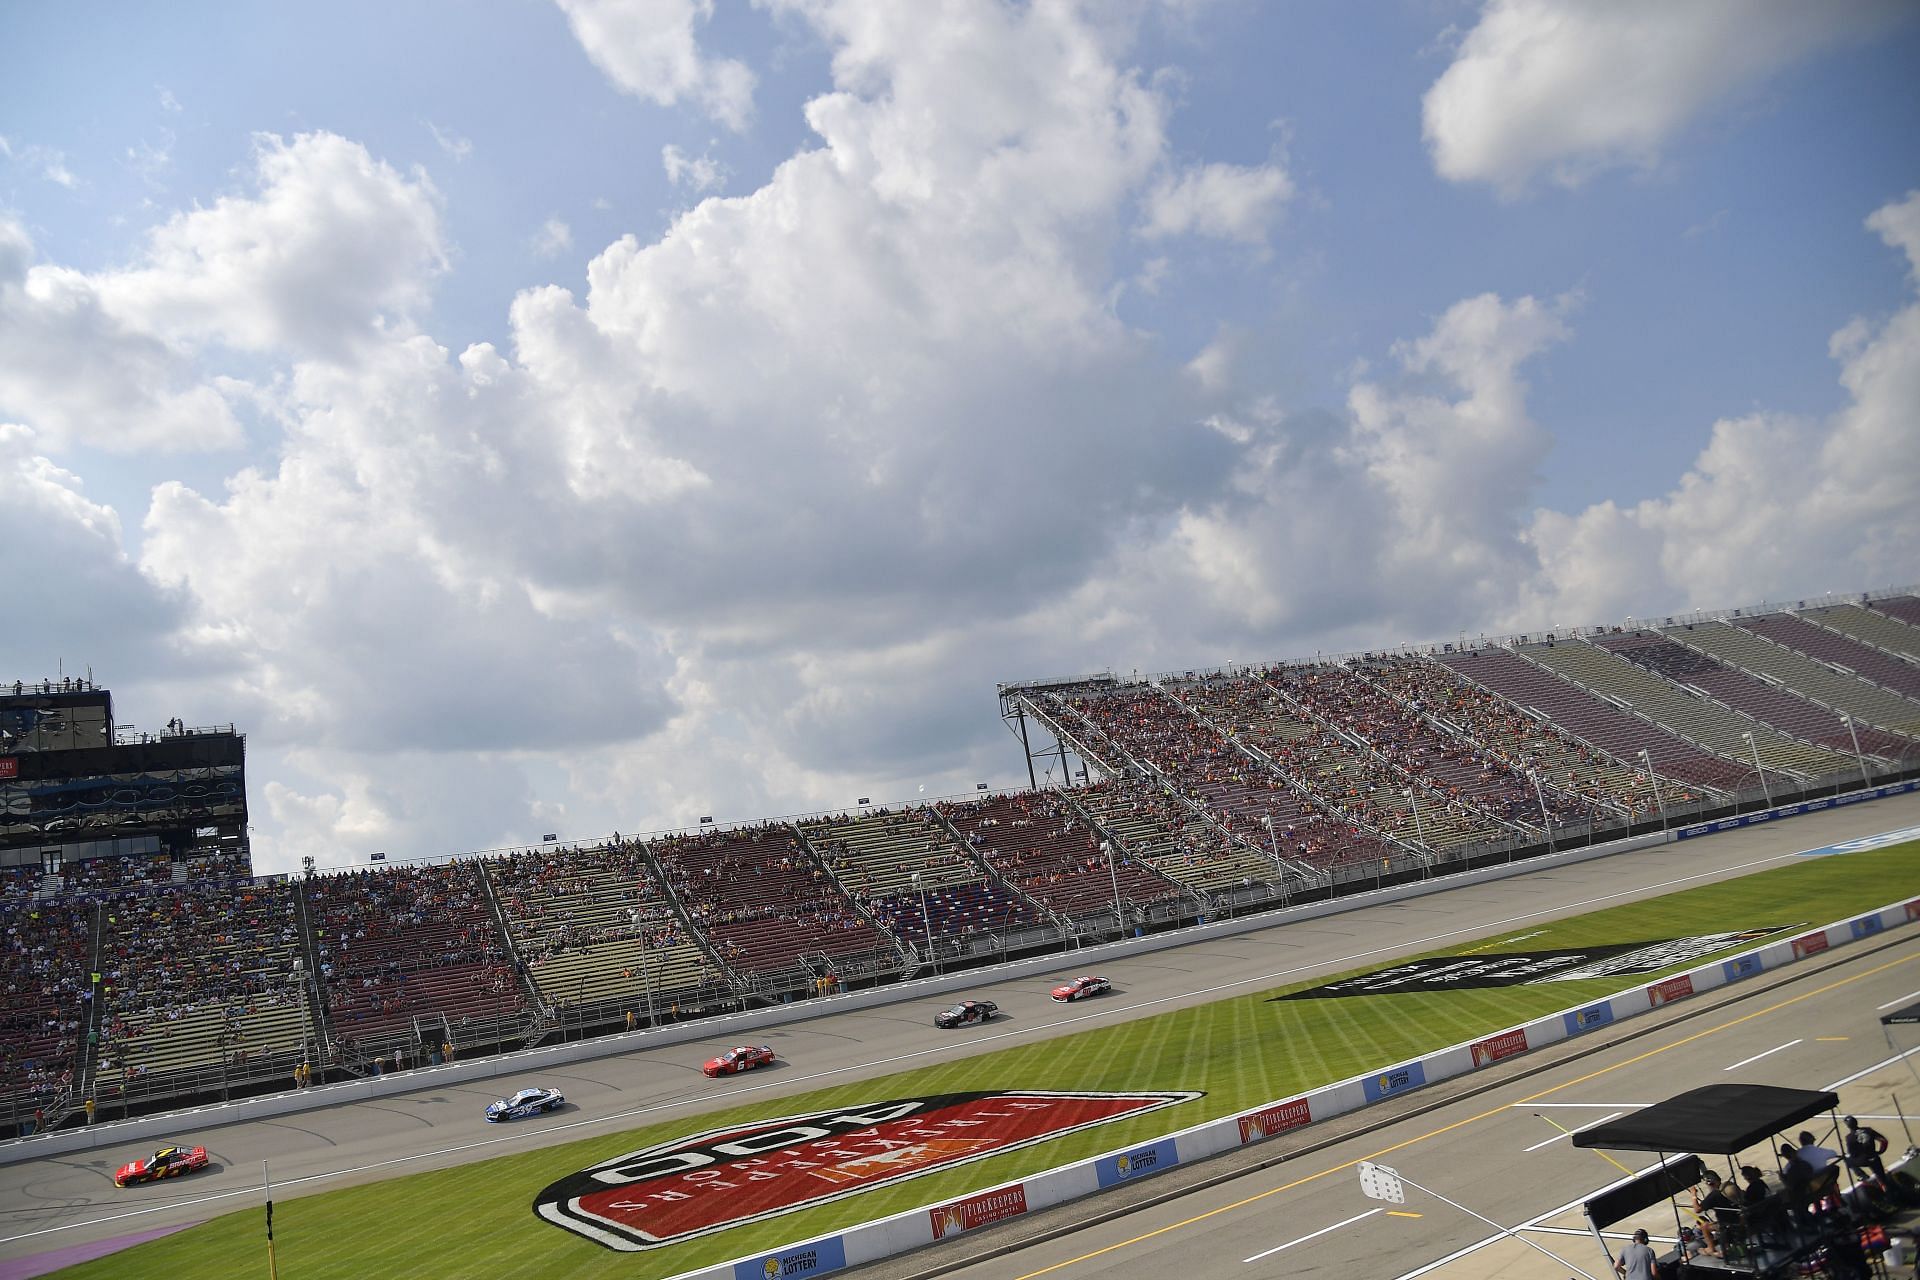 A general view of racing during the NASCAR Xfinity Series New Holland 250 at Michigan International Speedway (Photo by Logan Riely/Getty Images)